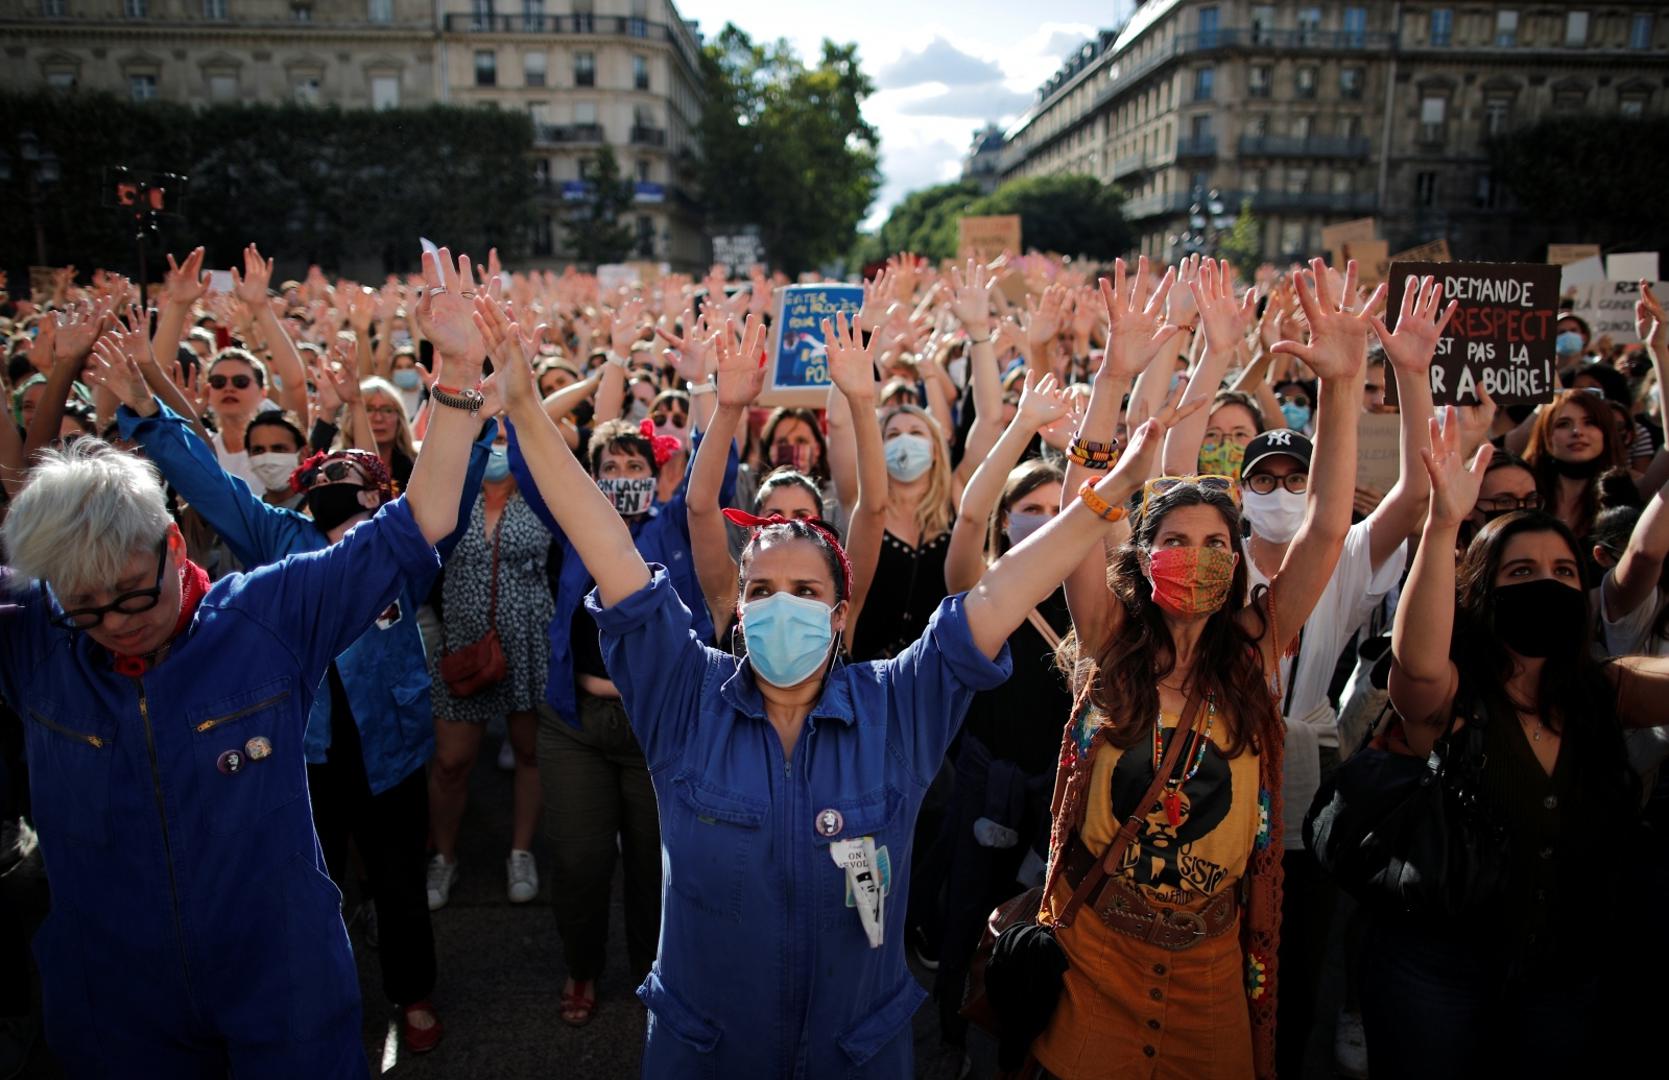 Feminist activists demonstrate against new government appointments in Paris Feminist activists gesture as they demonstrate against the appointments of French Interior Minister Gerald Darmanin and Justice Minister Eric Dupond-Moretti in the new French government, in front of the city hall in Paris, France, July 10, 2020. REUTERS/Benoit Tessier BENOIT TESSIER